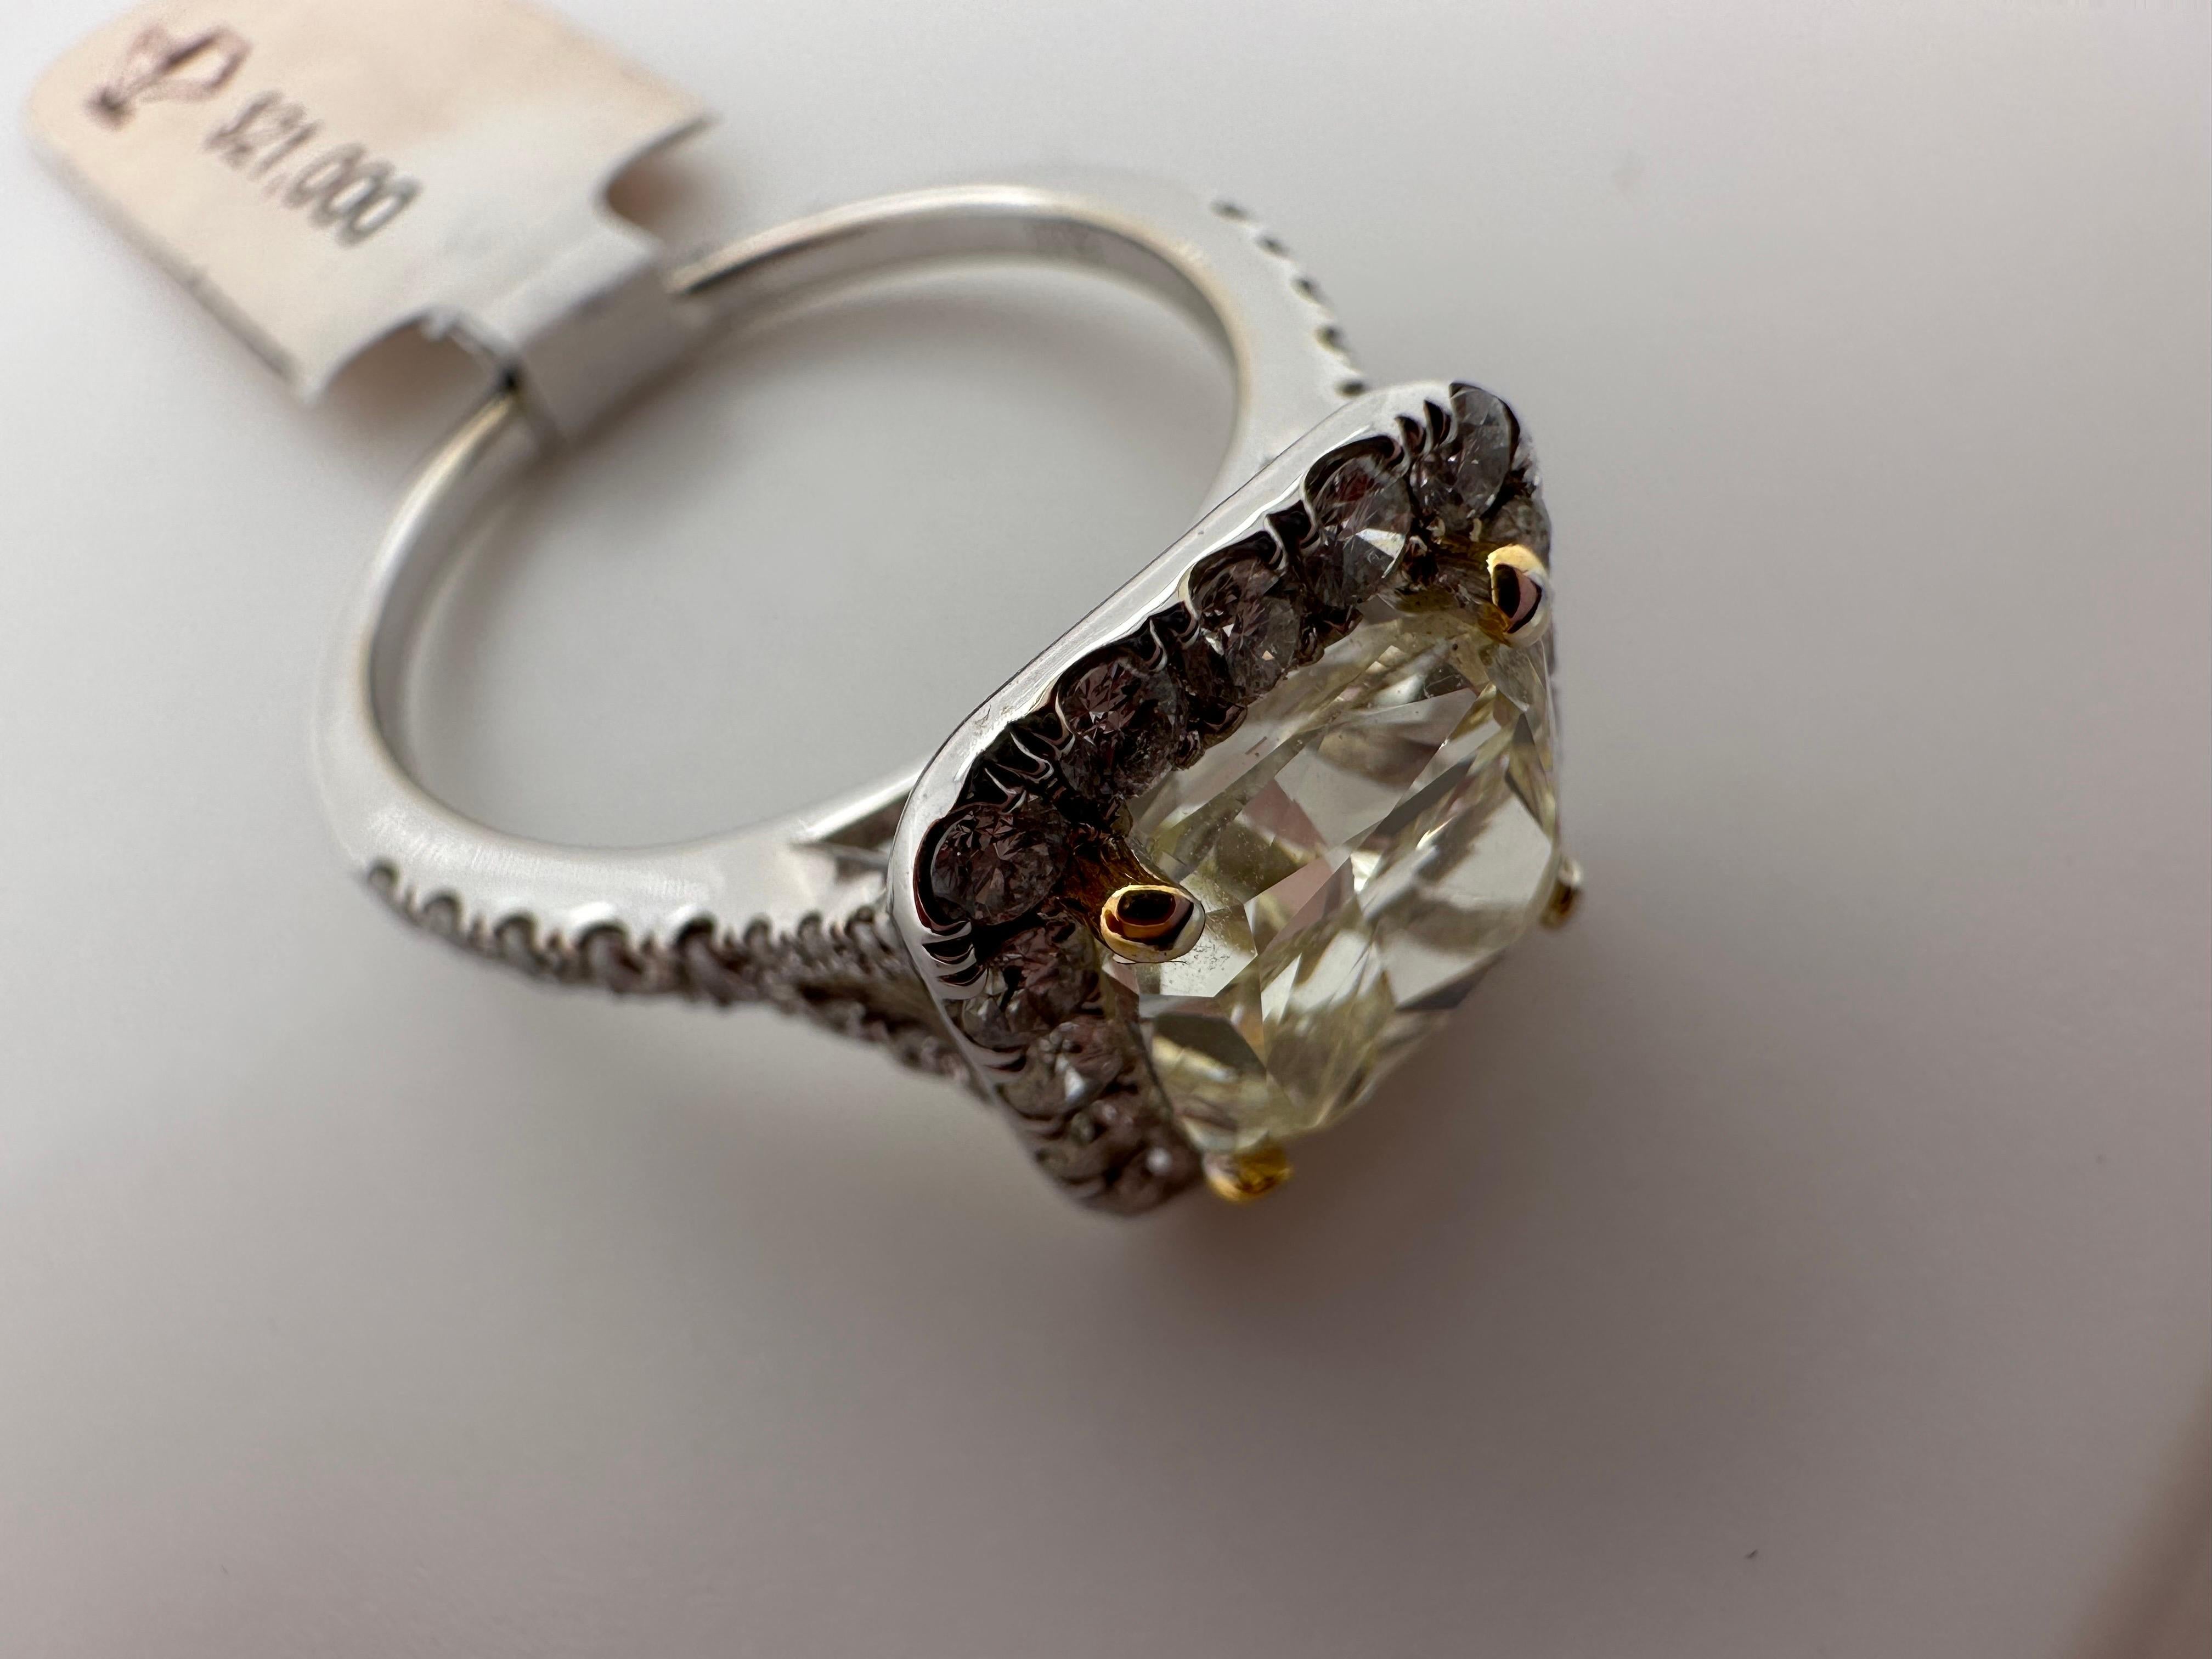 Beautiful engagement diamond ring in 18KT white gold, classical beauty!

Metal Type: 18KT
Natural Side Diamond(s):
Color: F-G
Cut:Round Brilliant
Carat: 0.50ct
Clarity: VS

Natural Center Diamond(s): 
Color: Fancy Yellow
Cut:Emerald
Carat: